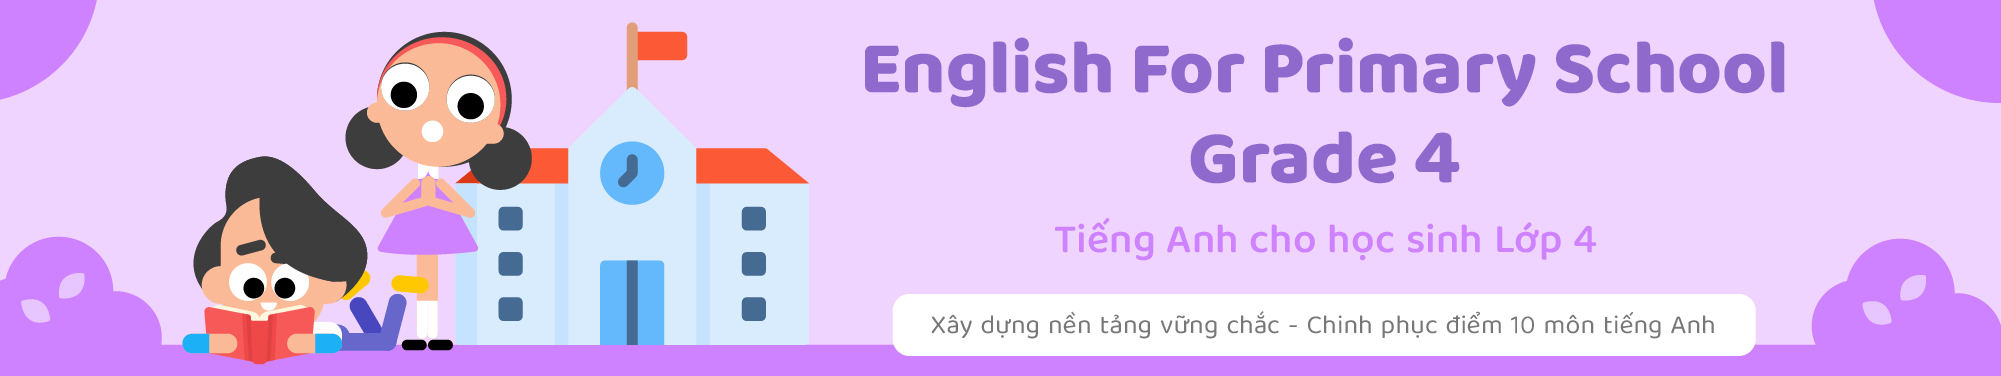 English For Primary School Grade 4 banner